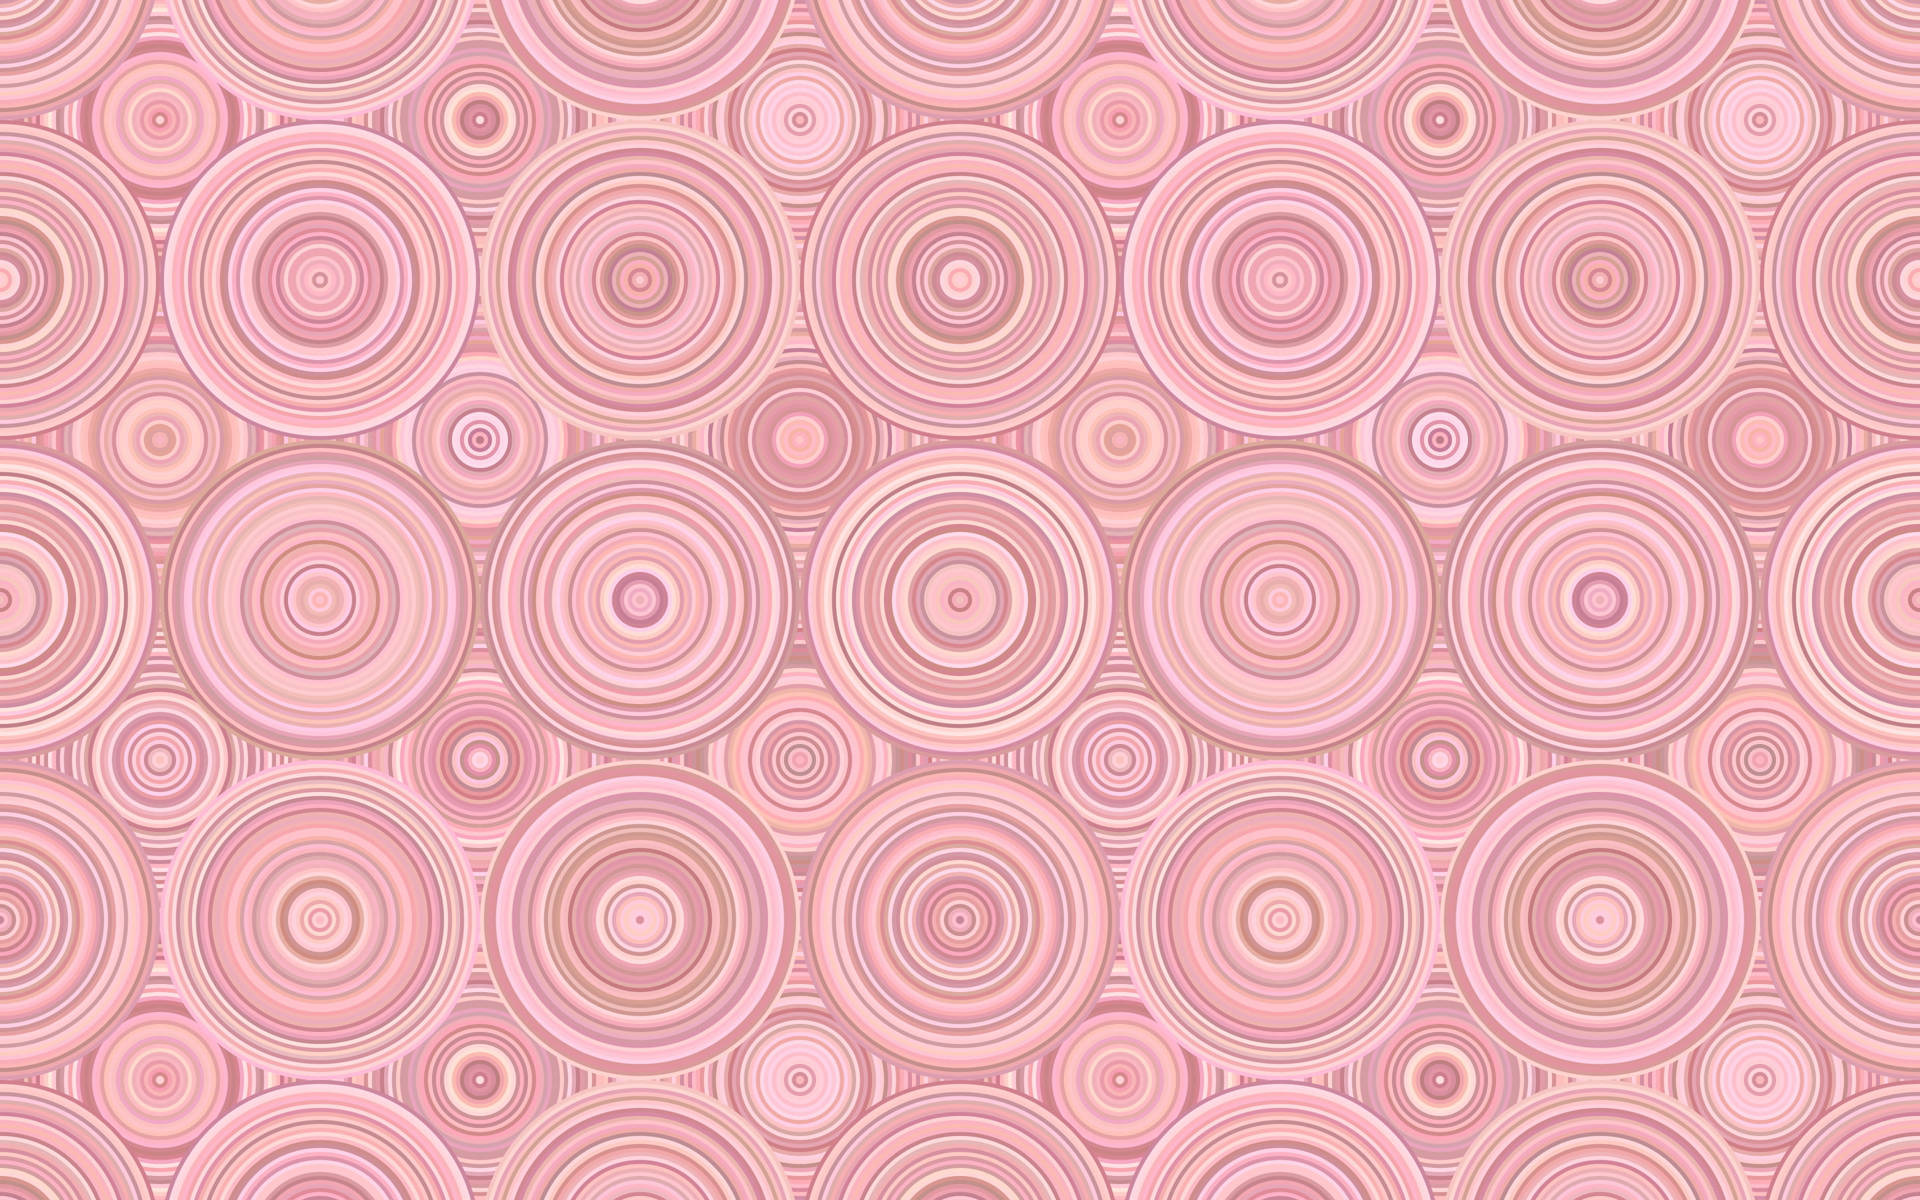 Circles On Pink Background